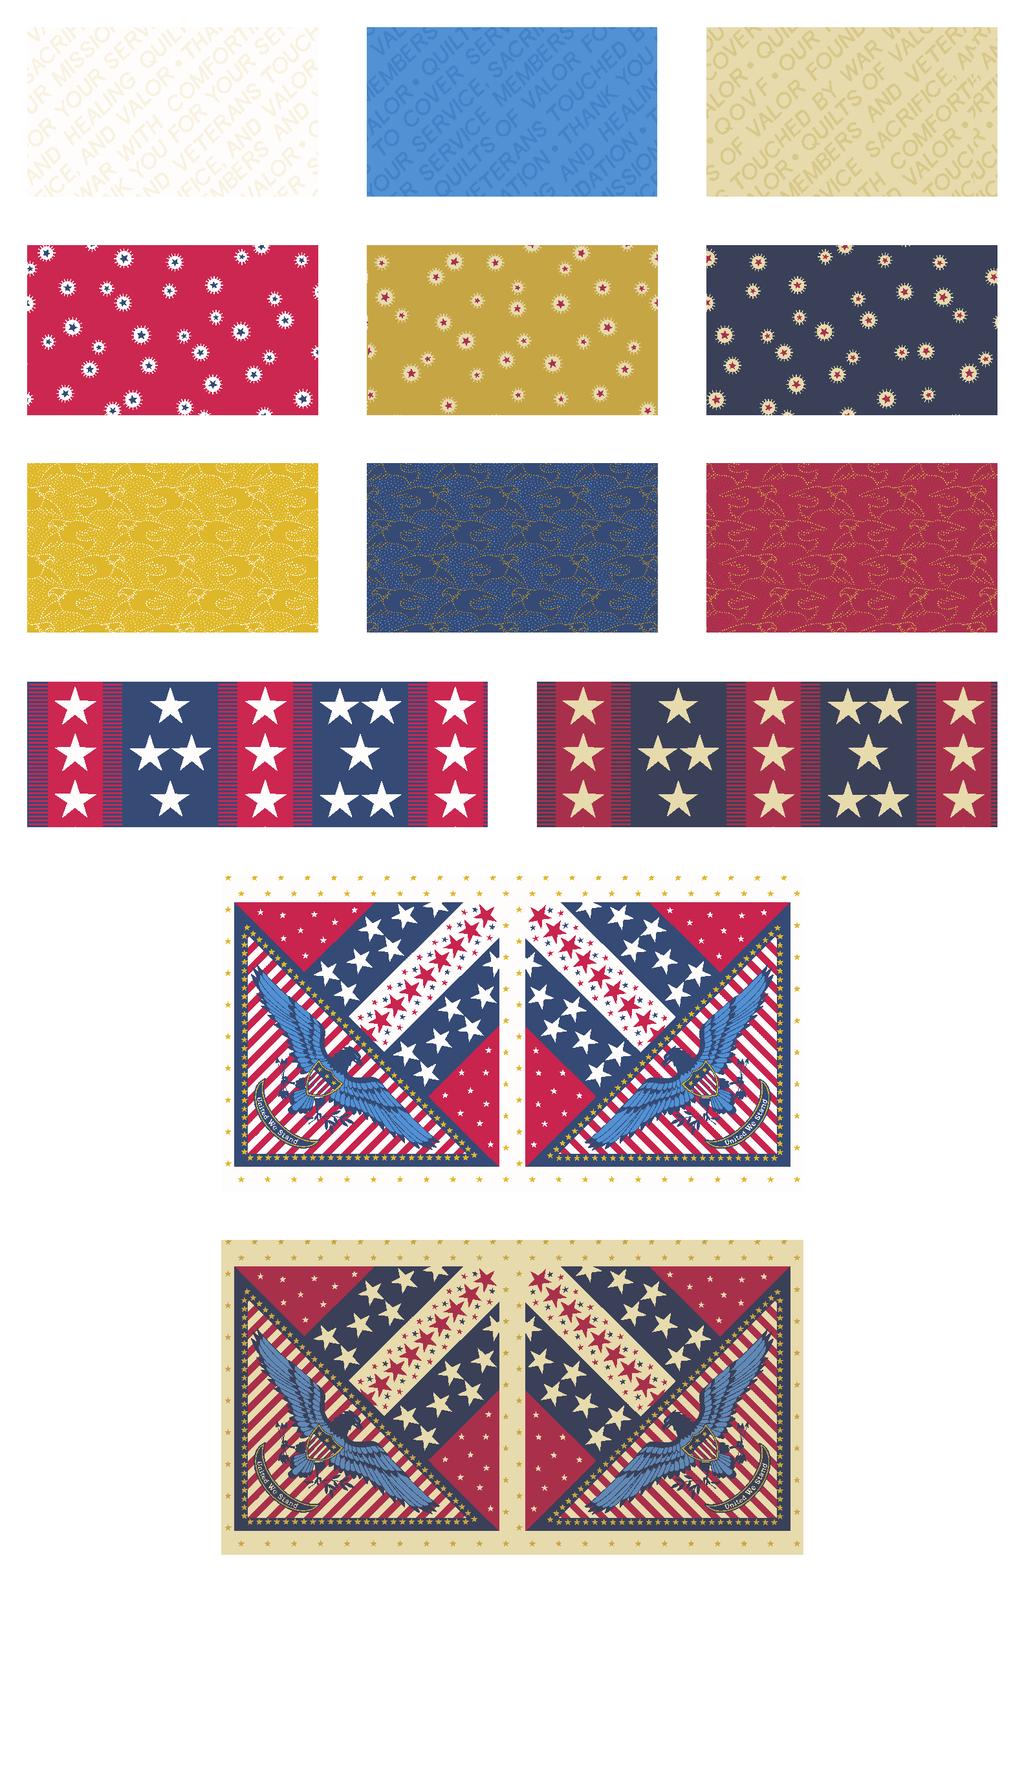 Patriotic for Quilts of Valor RS Y NOVR RS 7790-RL* /3 yds 7790-R* 7790-N* 7789-R* /8 yds 7789-Y* 3/8 yds 7789-* (includes binding) 5 7/8 yds (includes backing) 7788-RY* / yd 7788-R* 3/8 yd 7788-R*